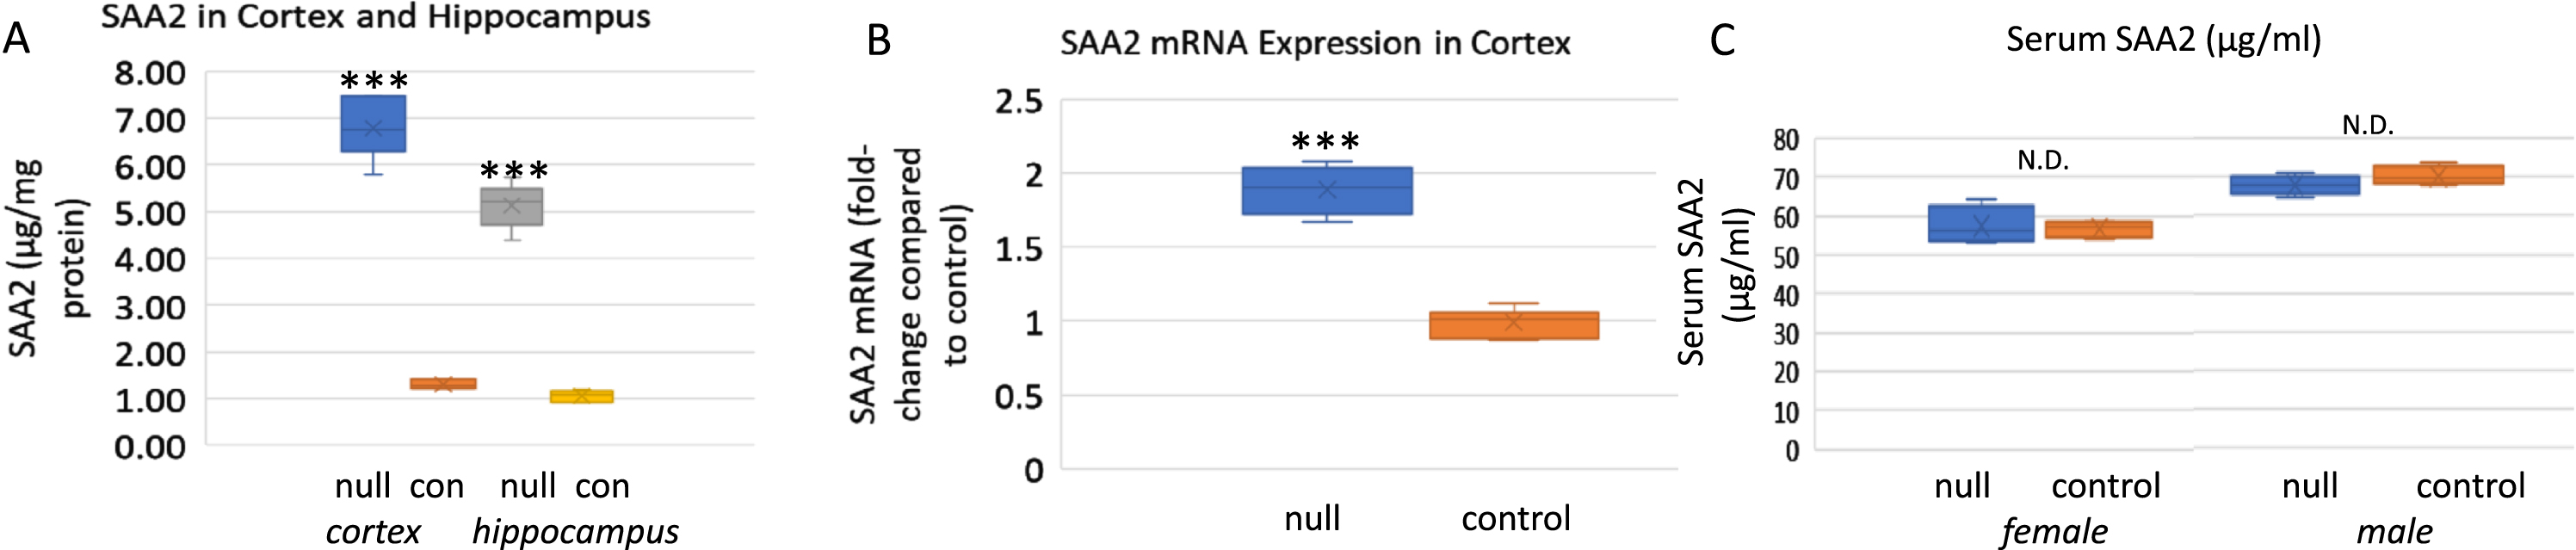 SAA in cortex, hippocampus, and serum of ARSB null mice and controls. A) SAA was measured by ELISA in the cortex and hippocampus of control and ARSB null mice. In cortex, control value was 1.30±0.09μg/mg protein compared to 6.78±0.63μg/mg protein in the ARSB-null mouse cortex. Values in hippocampus were similar (1.06±0.12 versus 5.13±0.47μg/mg protein; n = 6 in all groups). p-values are <0.001 for all comparisons (two sample t-test, two-tailed, unequal variance). B) QRT-PCR data indicate 1.89-times higher expression in the ARSB-null mice than the control mice (n = 6; p < 0.001, two sample t-test, two-tailed, unequal variance). Values were similar for male and female mice. C) Serum levels of SAA were similar in control and ARSB-null mice, and higher in the male mice than the female mice (n = 4 in each group). con, control; null, ARSB-null.